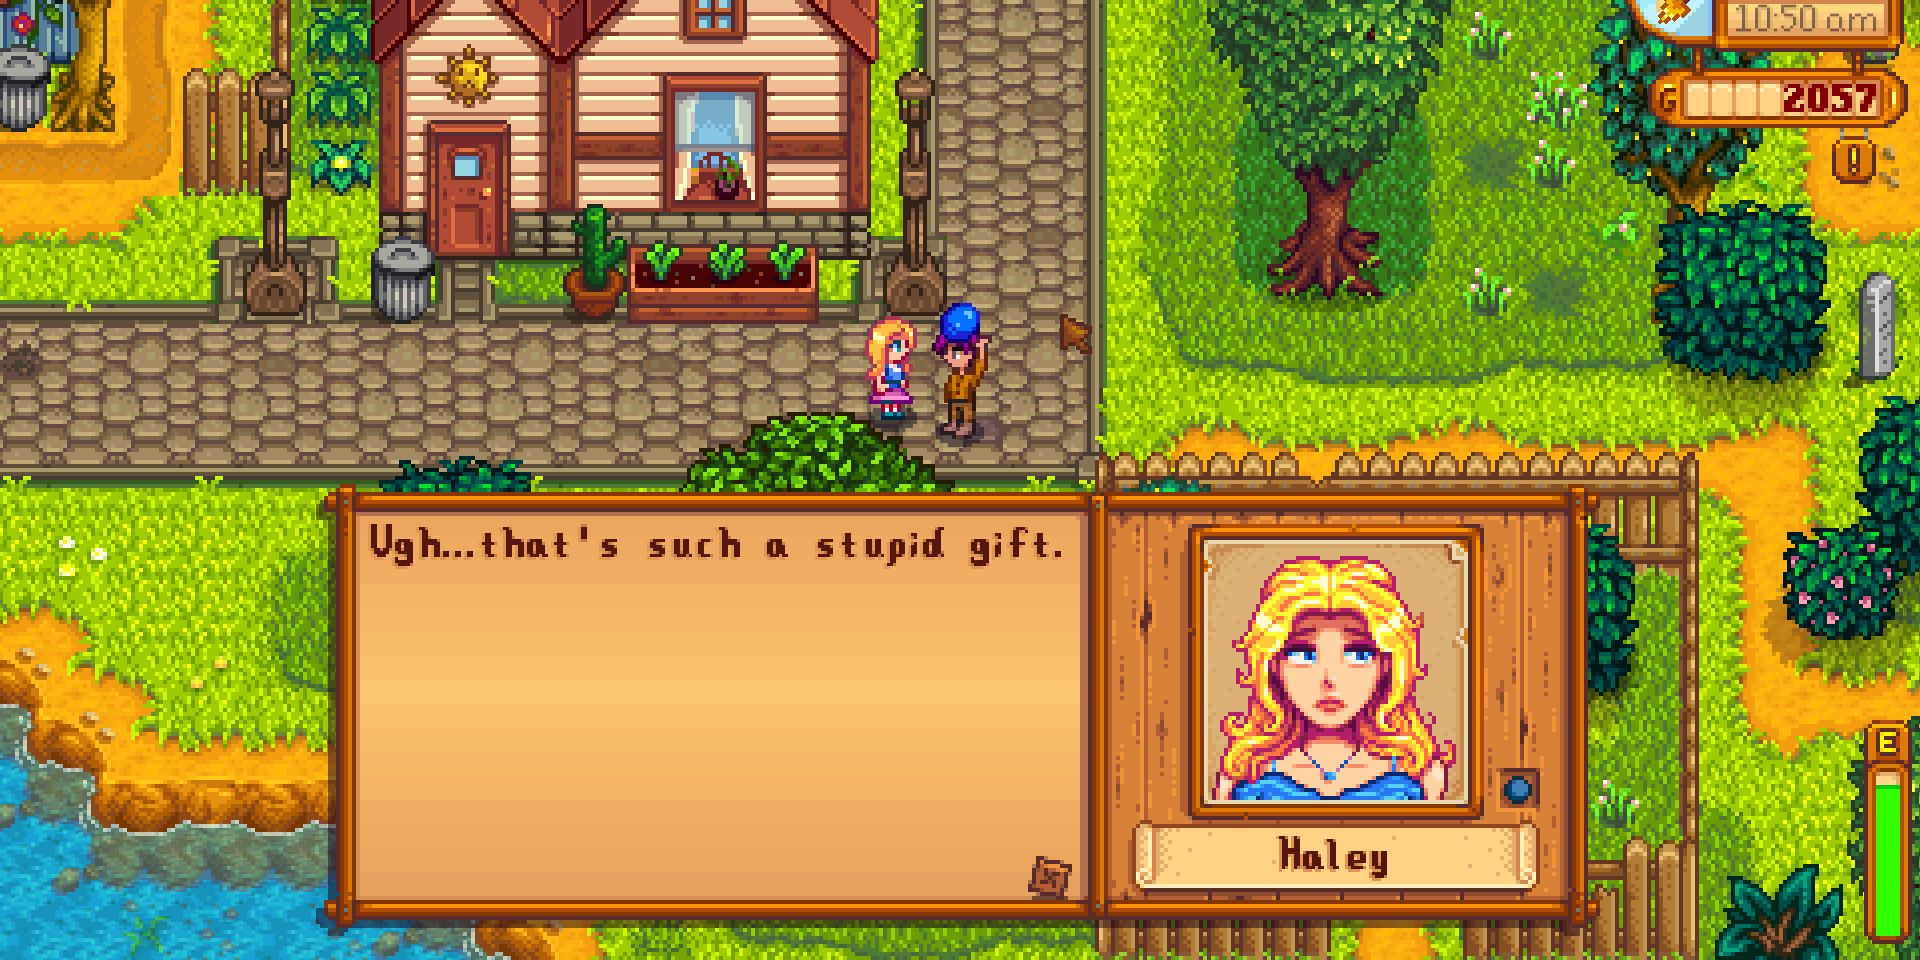 A farmer gives a blueberry to Hayley as a gift, and she isn't impressed. Hayley dialogue text: "Ugh...that's such a stupid gift."